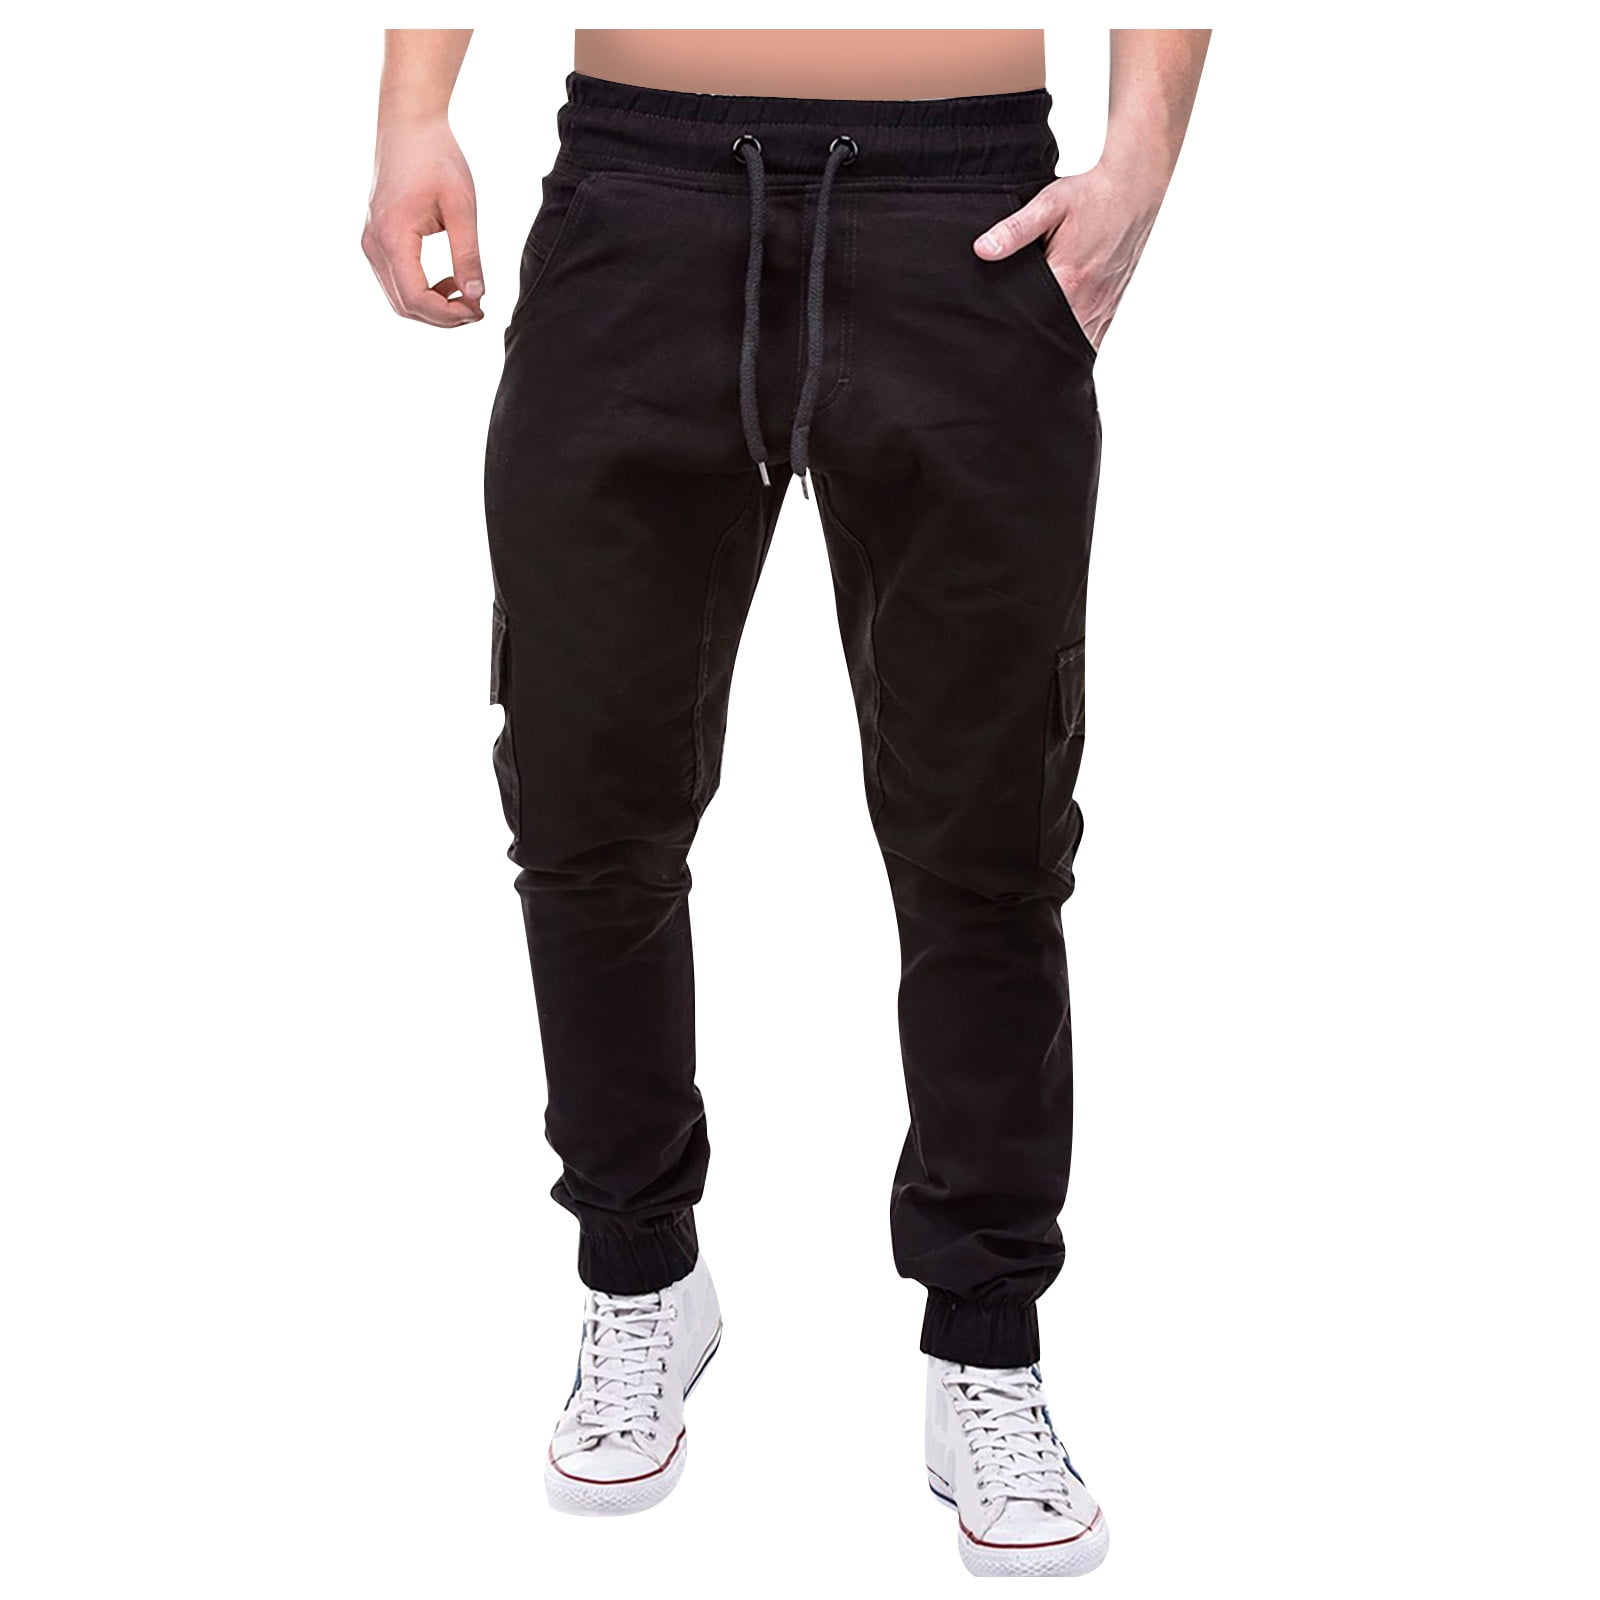 Buy Olive Trousers  Pants for Men by British Club Online  Ajiocom